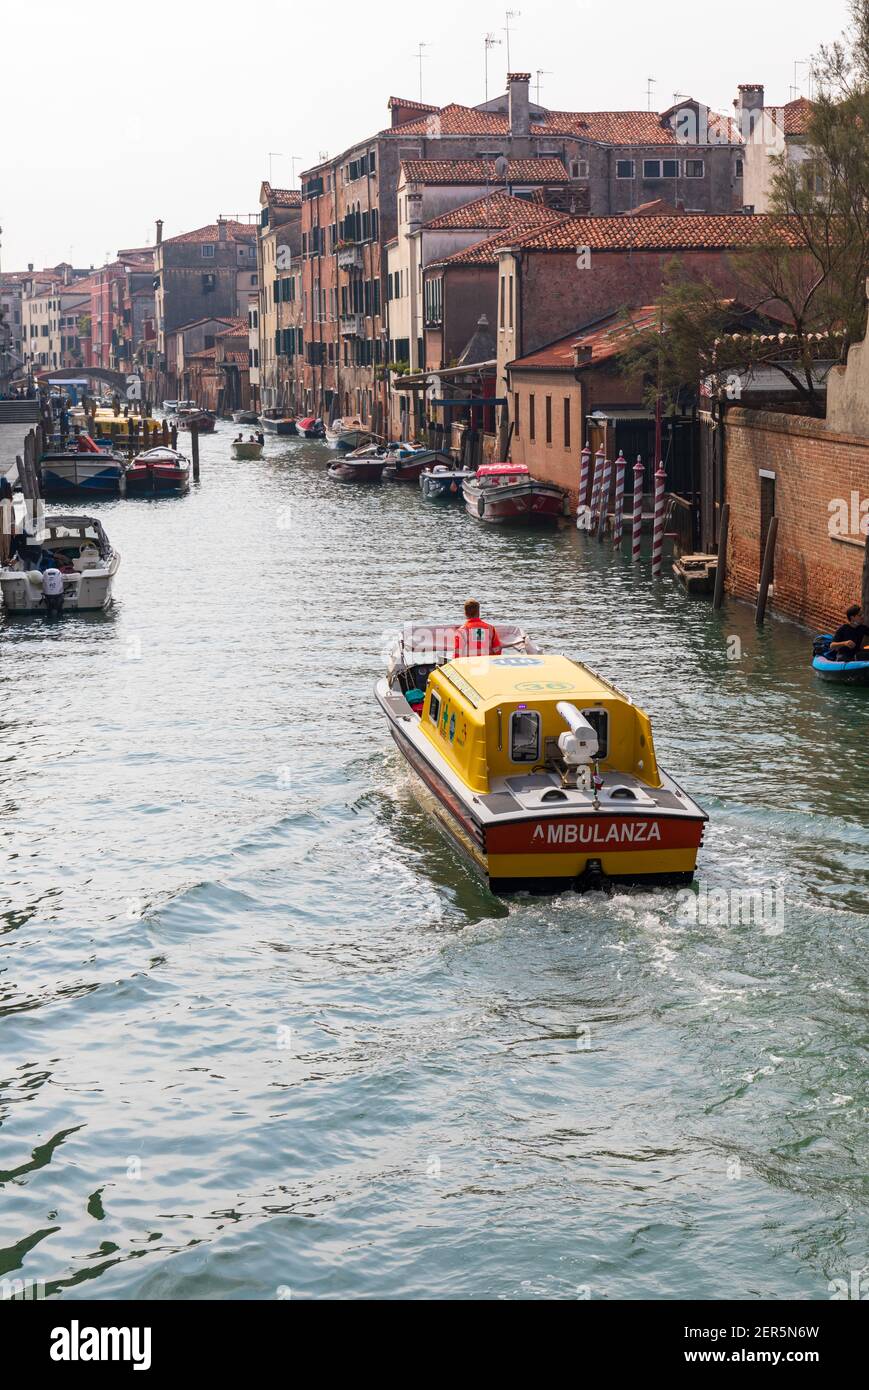 An emergency Ambulance boat travelling along a canal in the Castello region of Venice, Italy Stock Photo